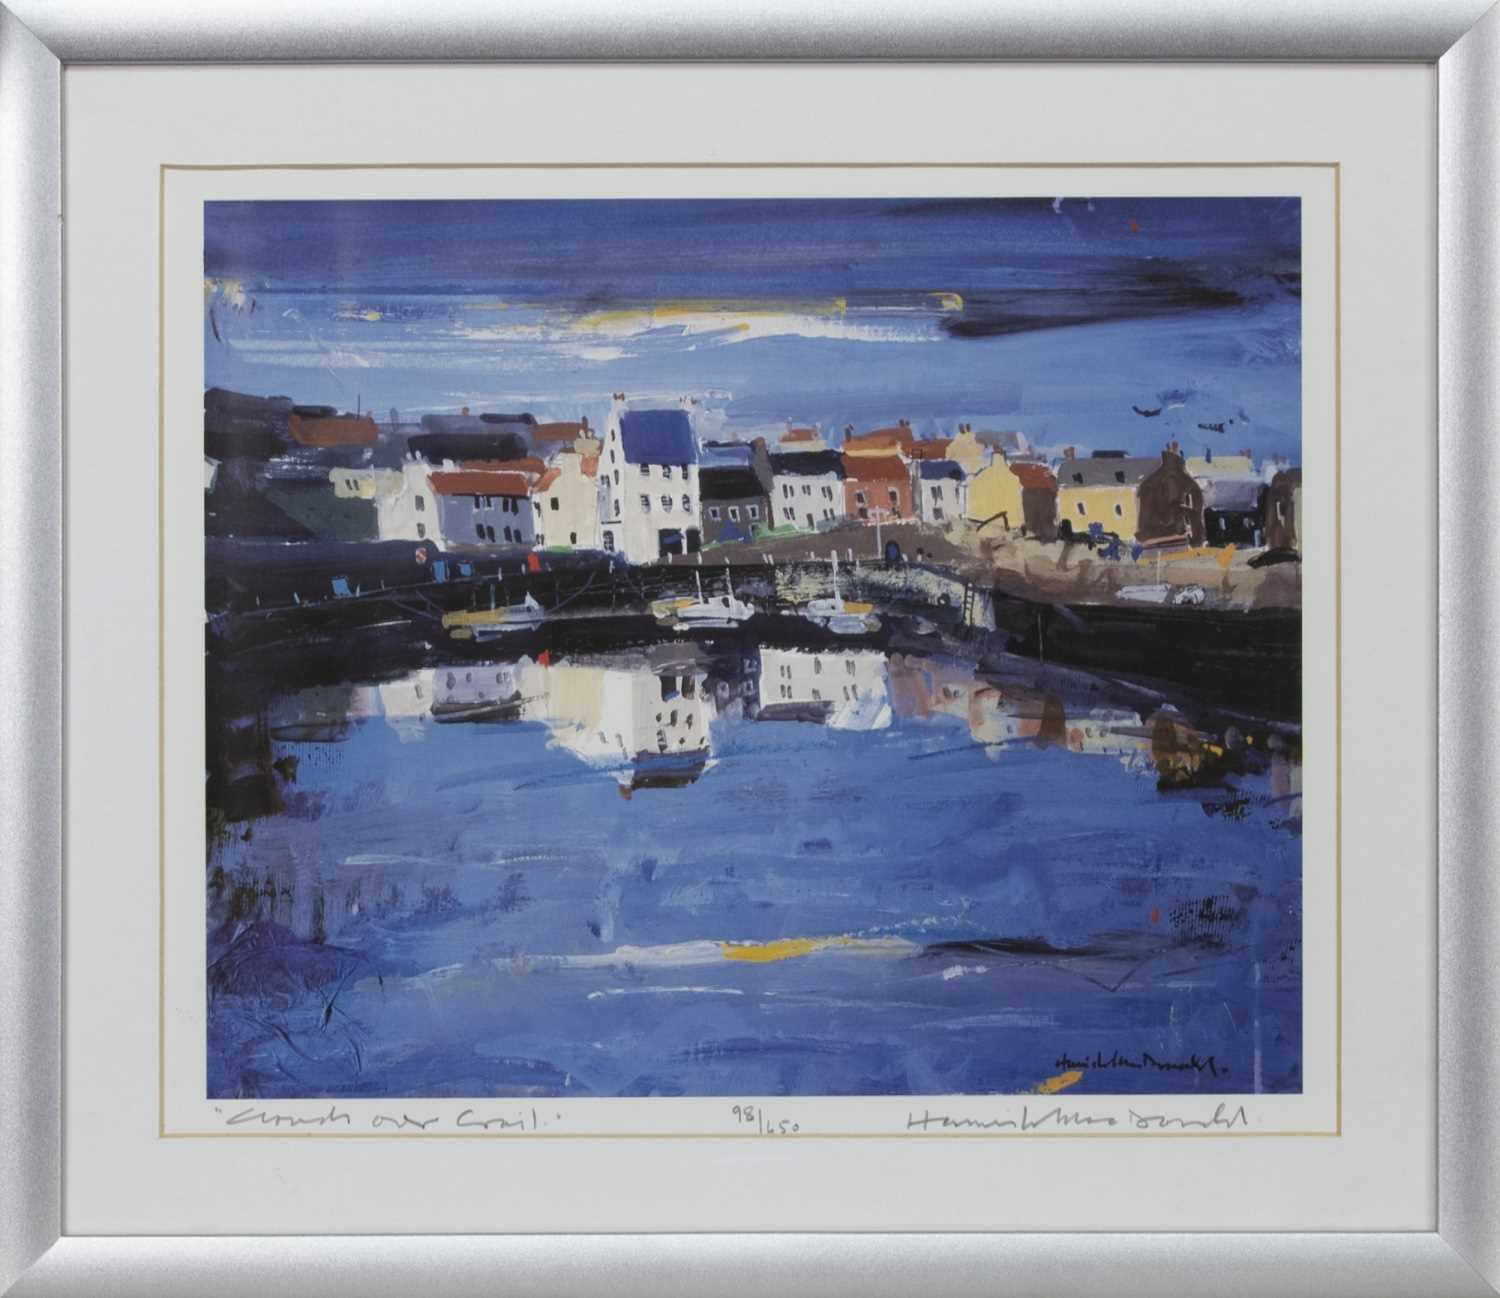 Lot 513 - CLOUDS OVER CRAIL, A LIMITED EDITION PRINT BY HAMISH MACDONALD